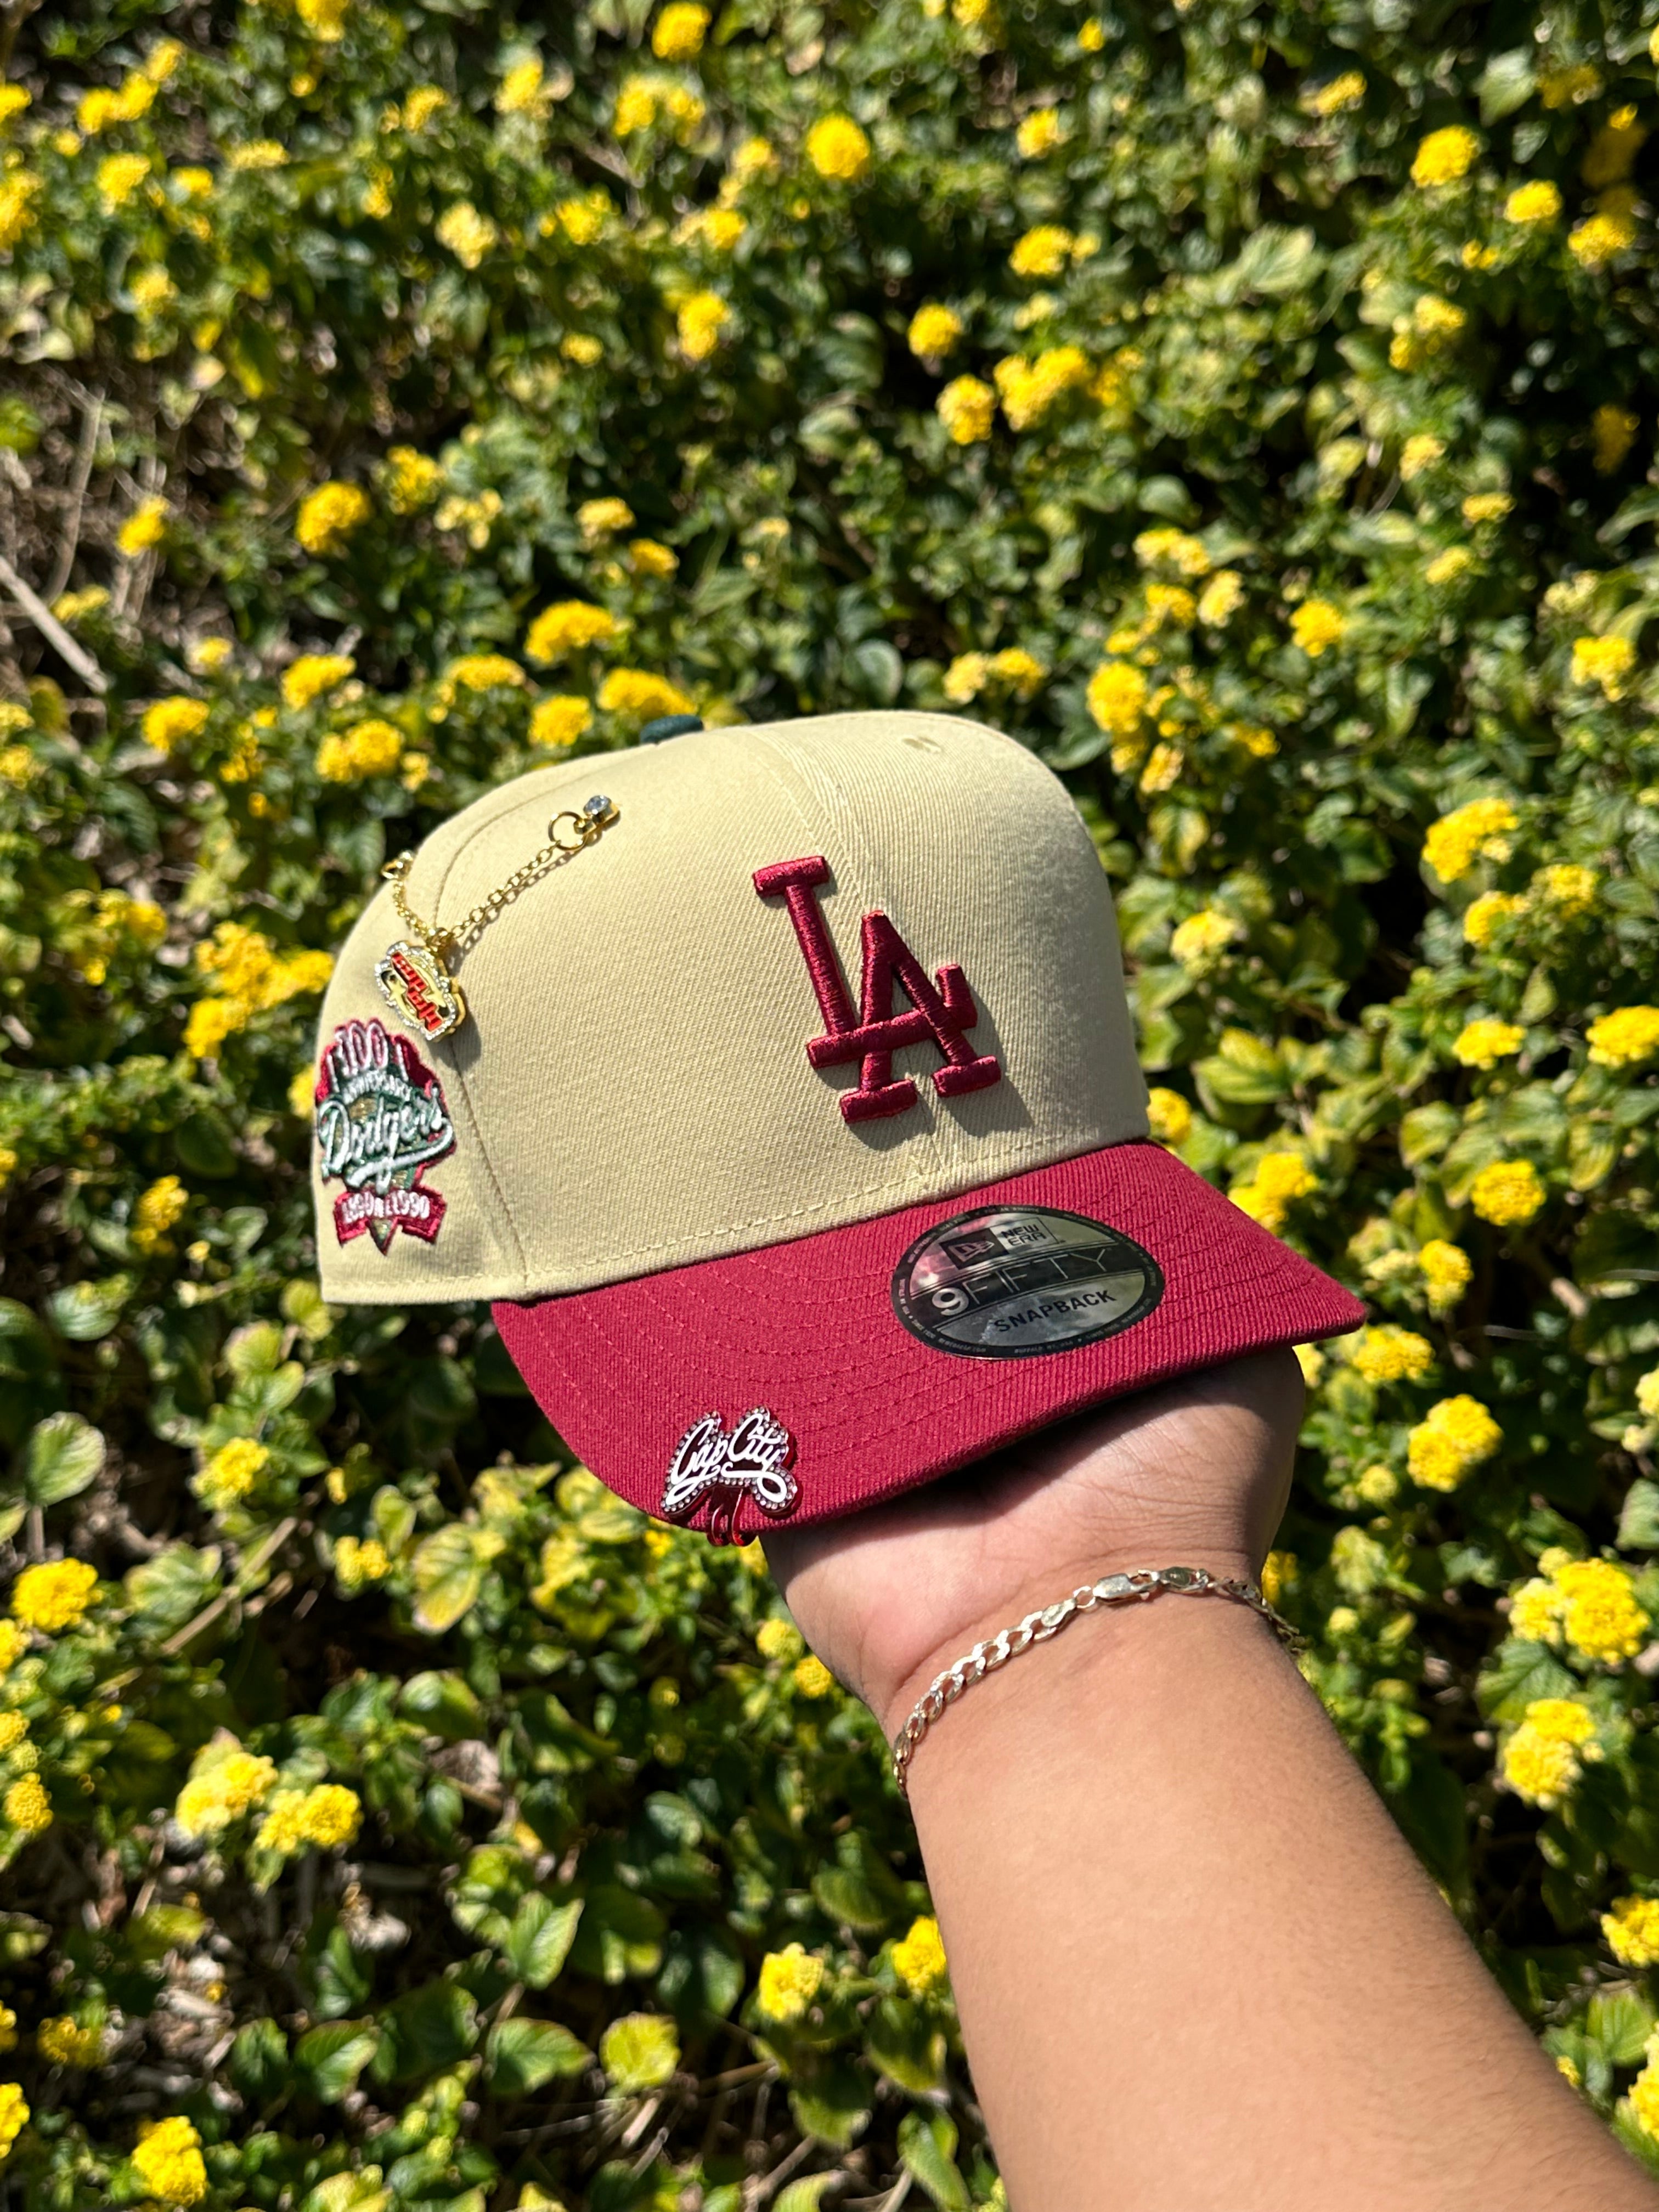 NEW ERA EXCLUSIVE 9FIFTY VEGAS GOLD LOS ANGELES DODGERS SNAPBACK W/ 100TH ANNIVERSARY PATCH